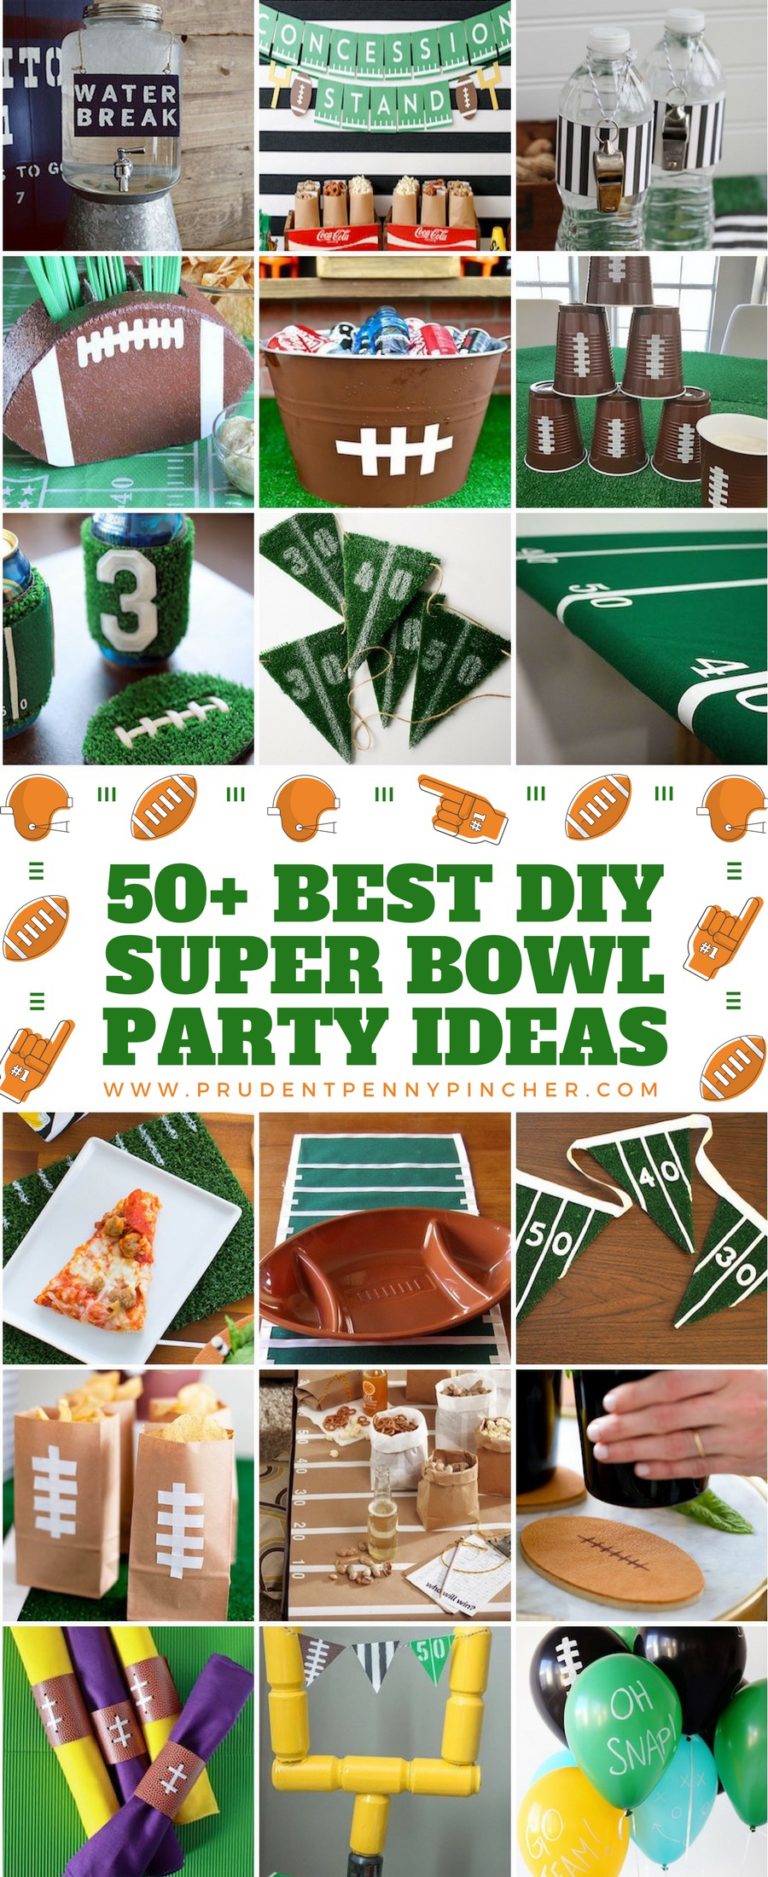 50 Best DIY Super Bowl Party Ideas Prudent Penny Pincher